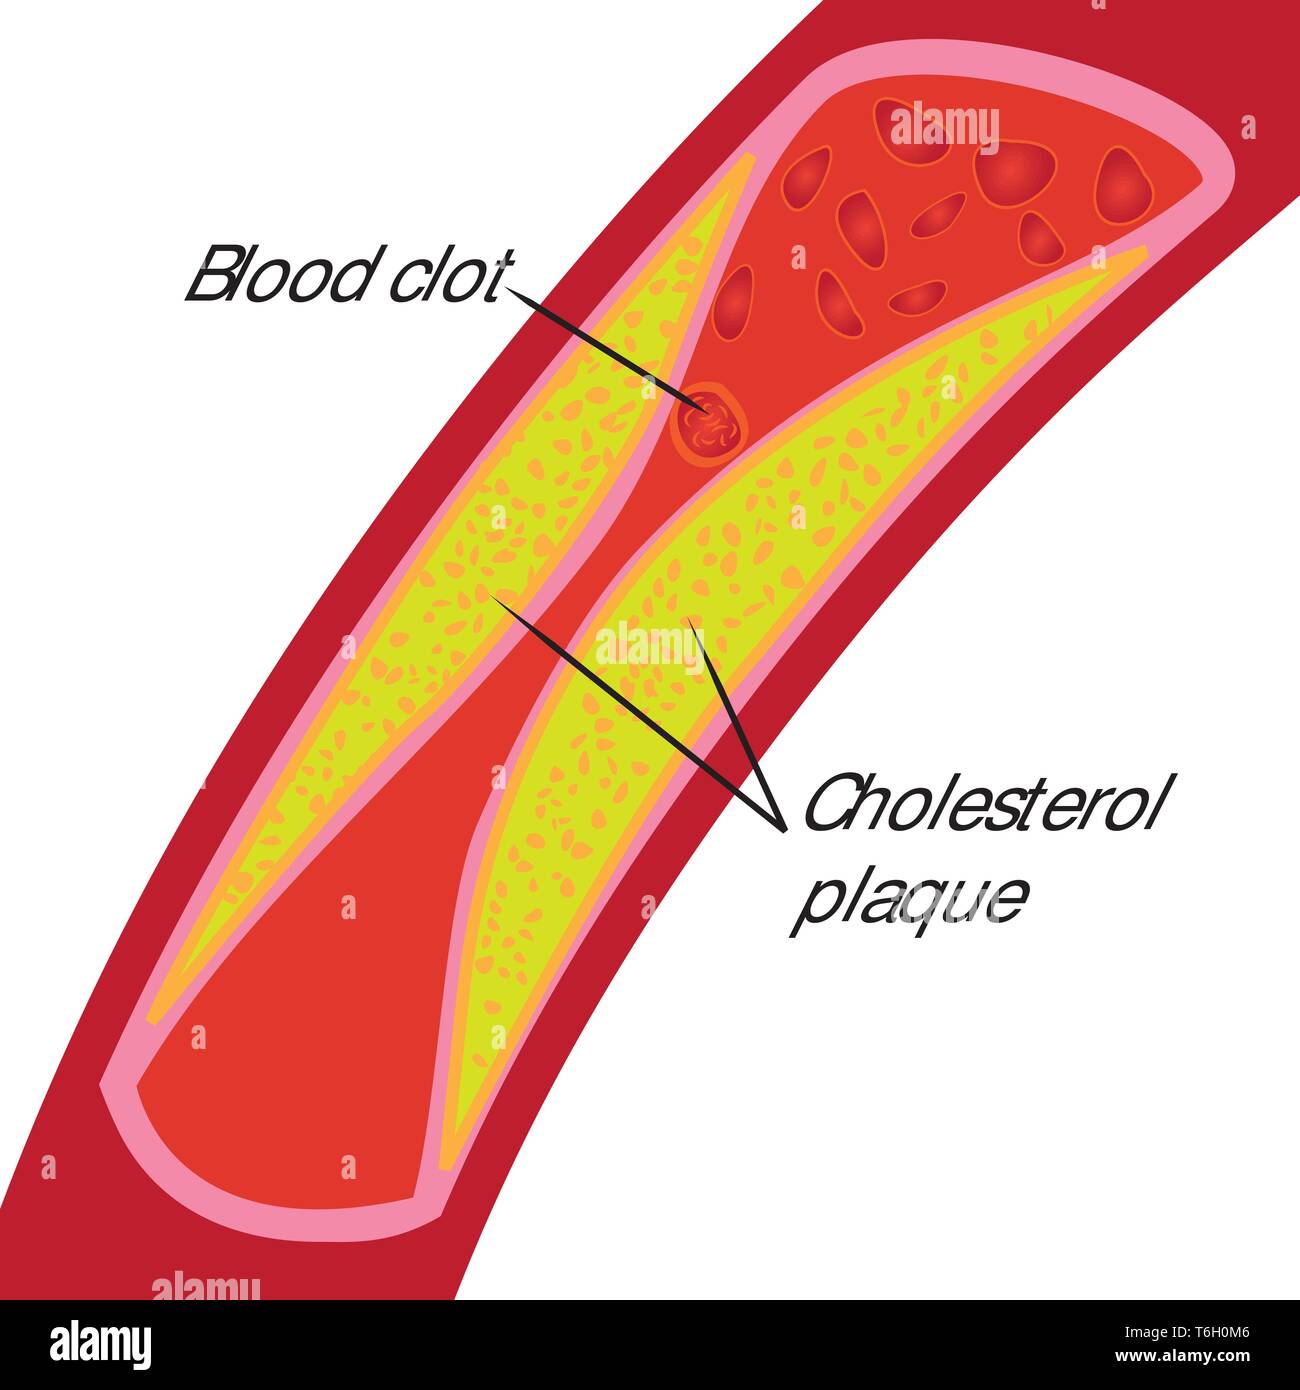 Blood clot and cholesterol plaque. Blocked blood vessel ...